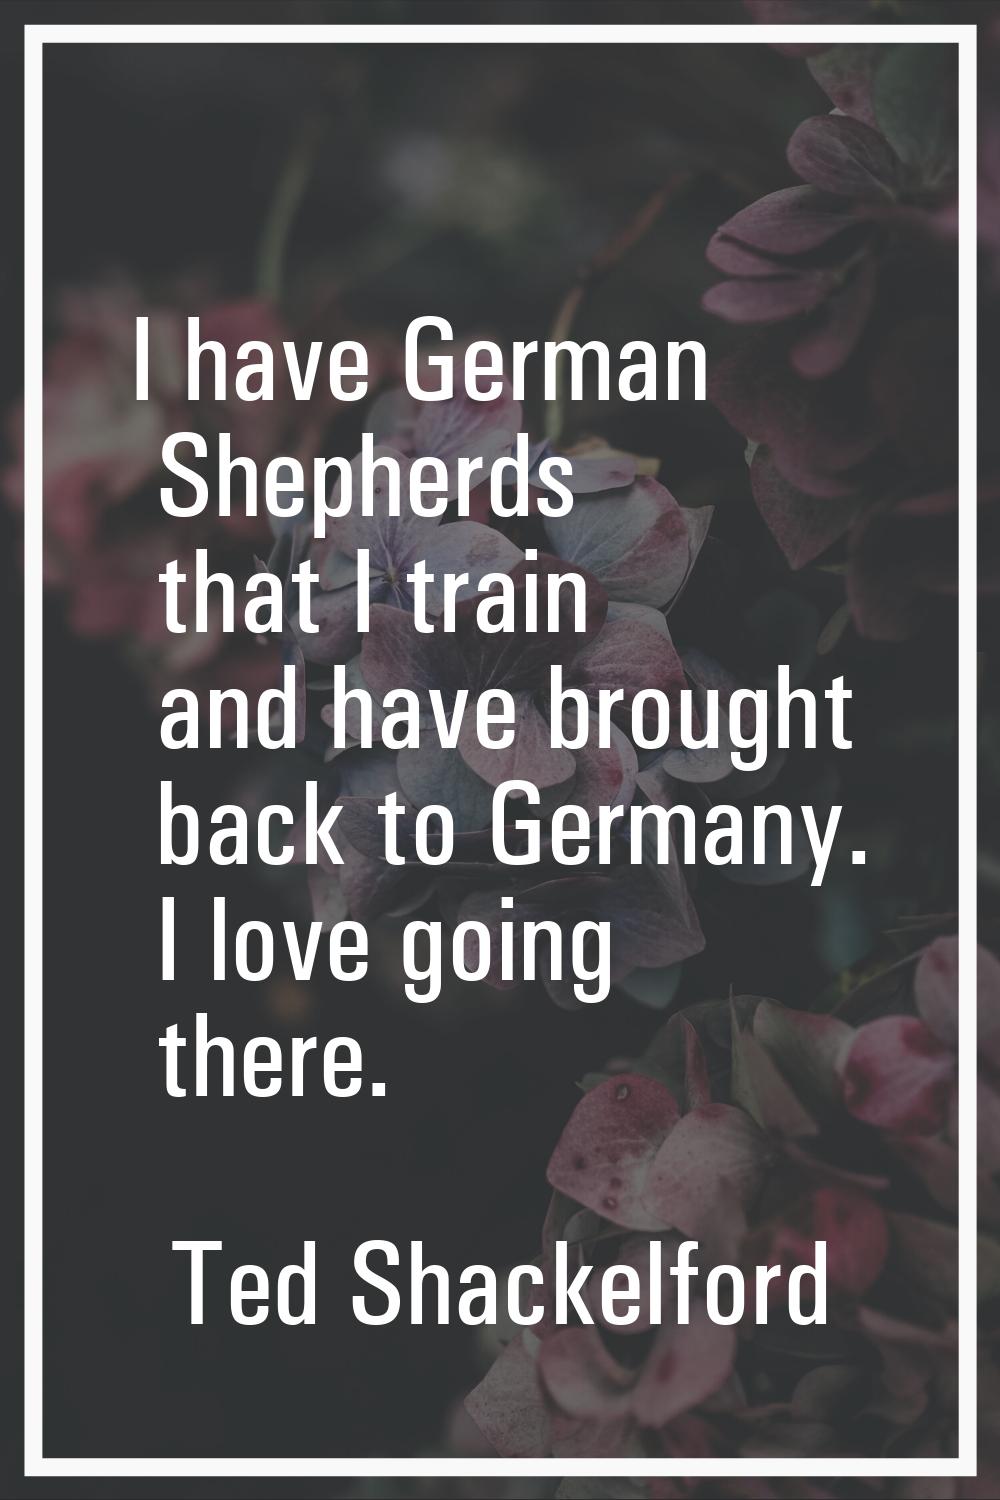 I have German Shepherds that I train and have brought back to Germany. I love going there.